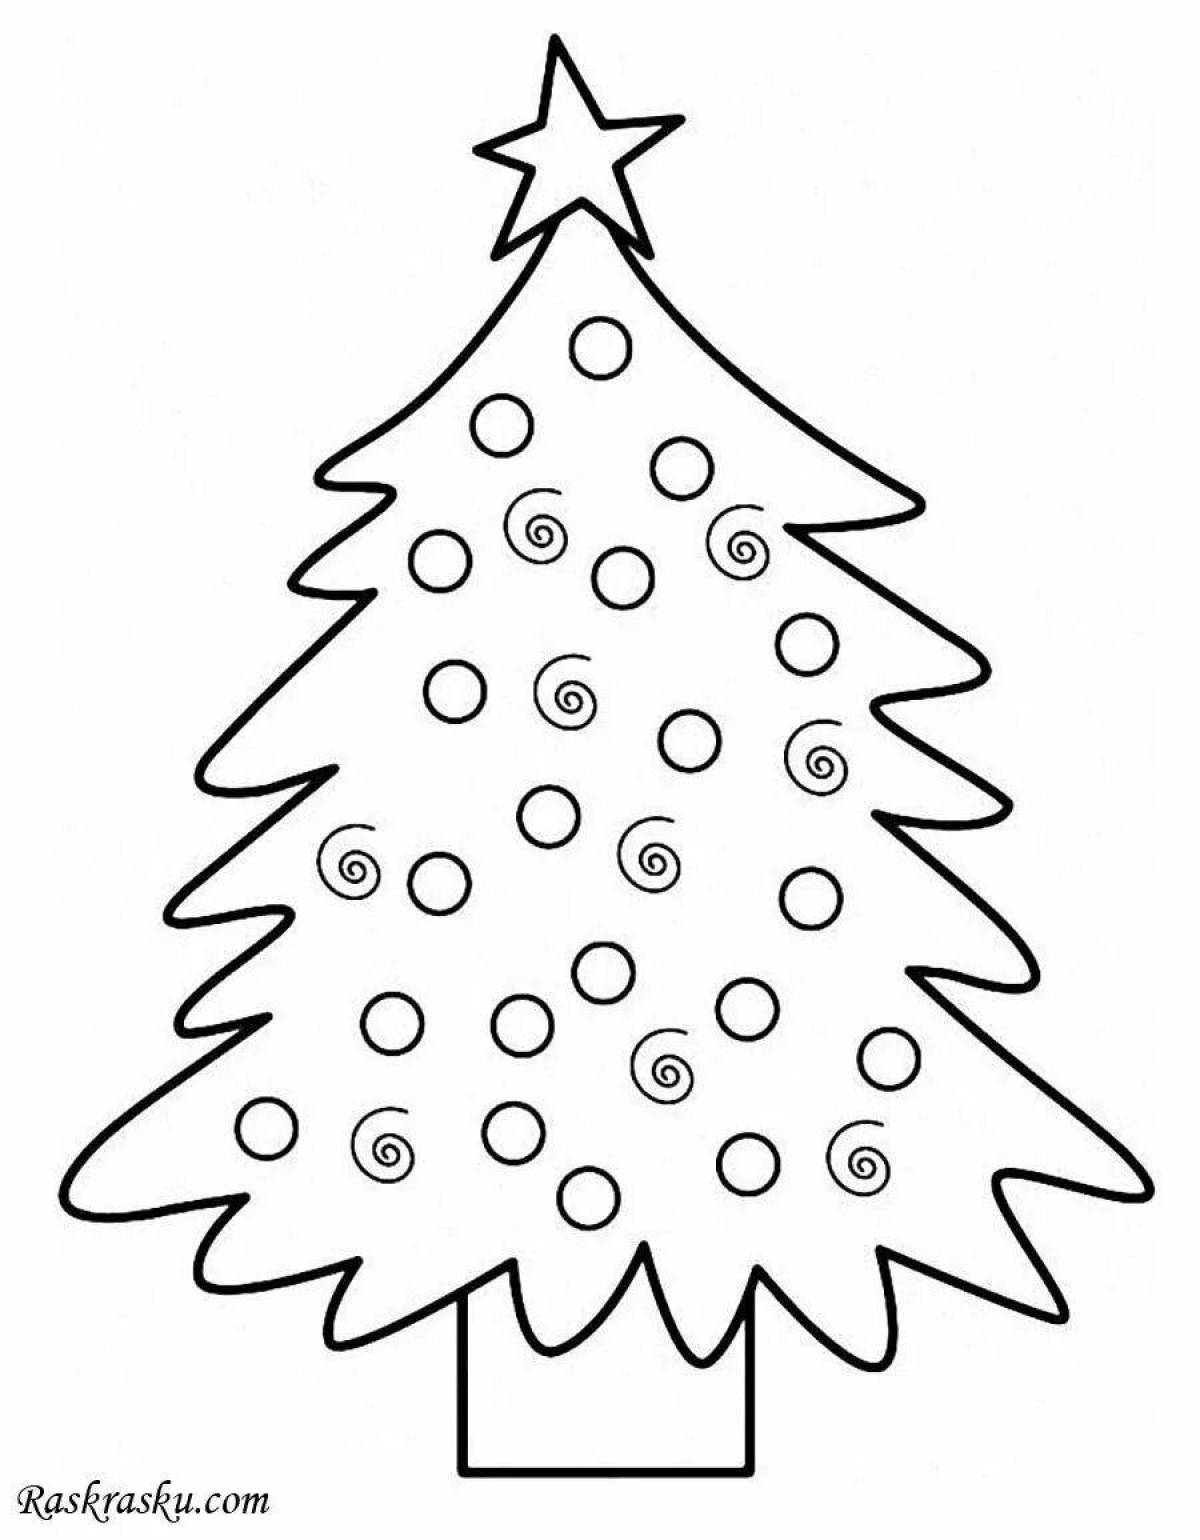 Dazzling Christmas tree coloring book for kids